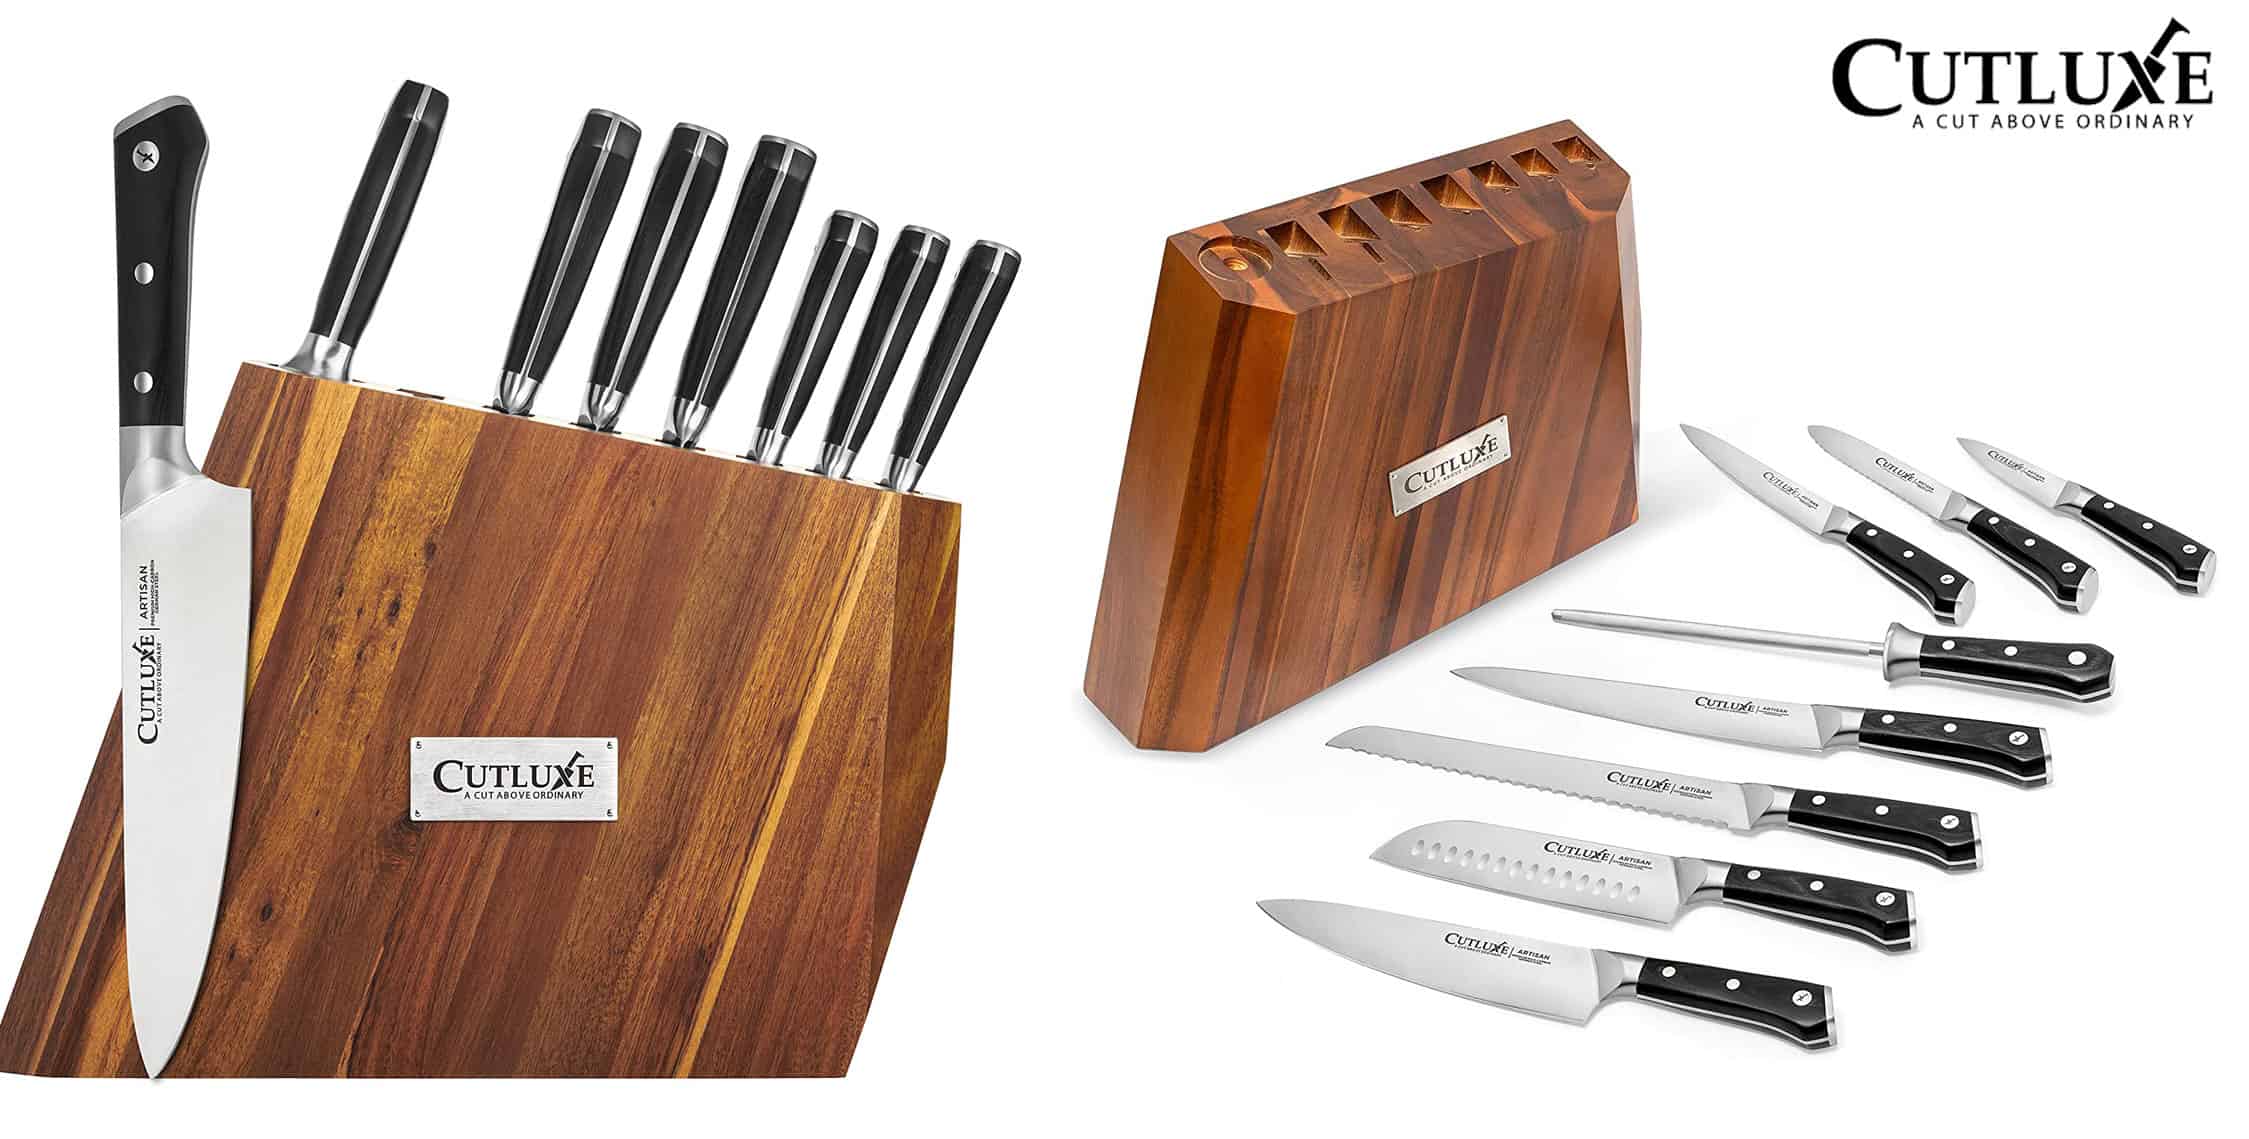 Pick up This $300 Set of 'Extra Sharp' Knives for Just $80 at